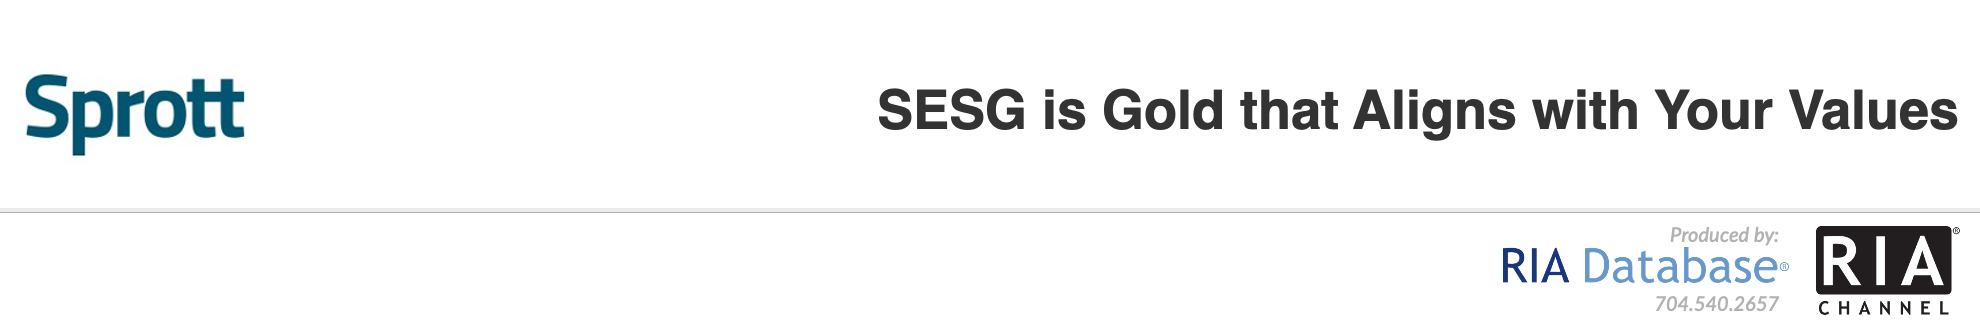 SESG is Gold that Aligns with Your Values